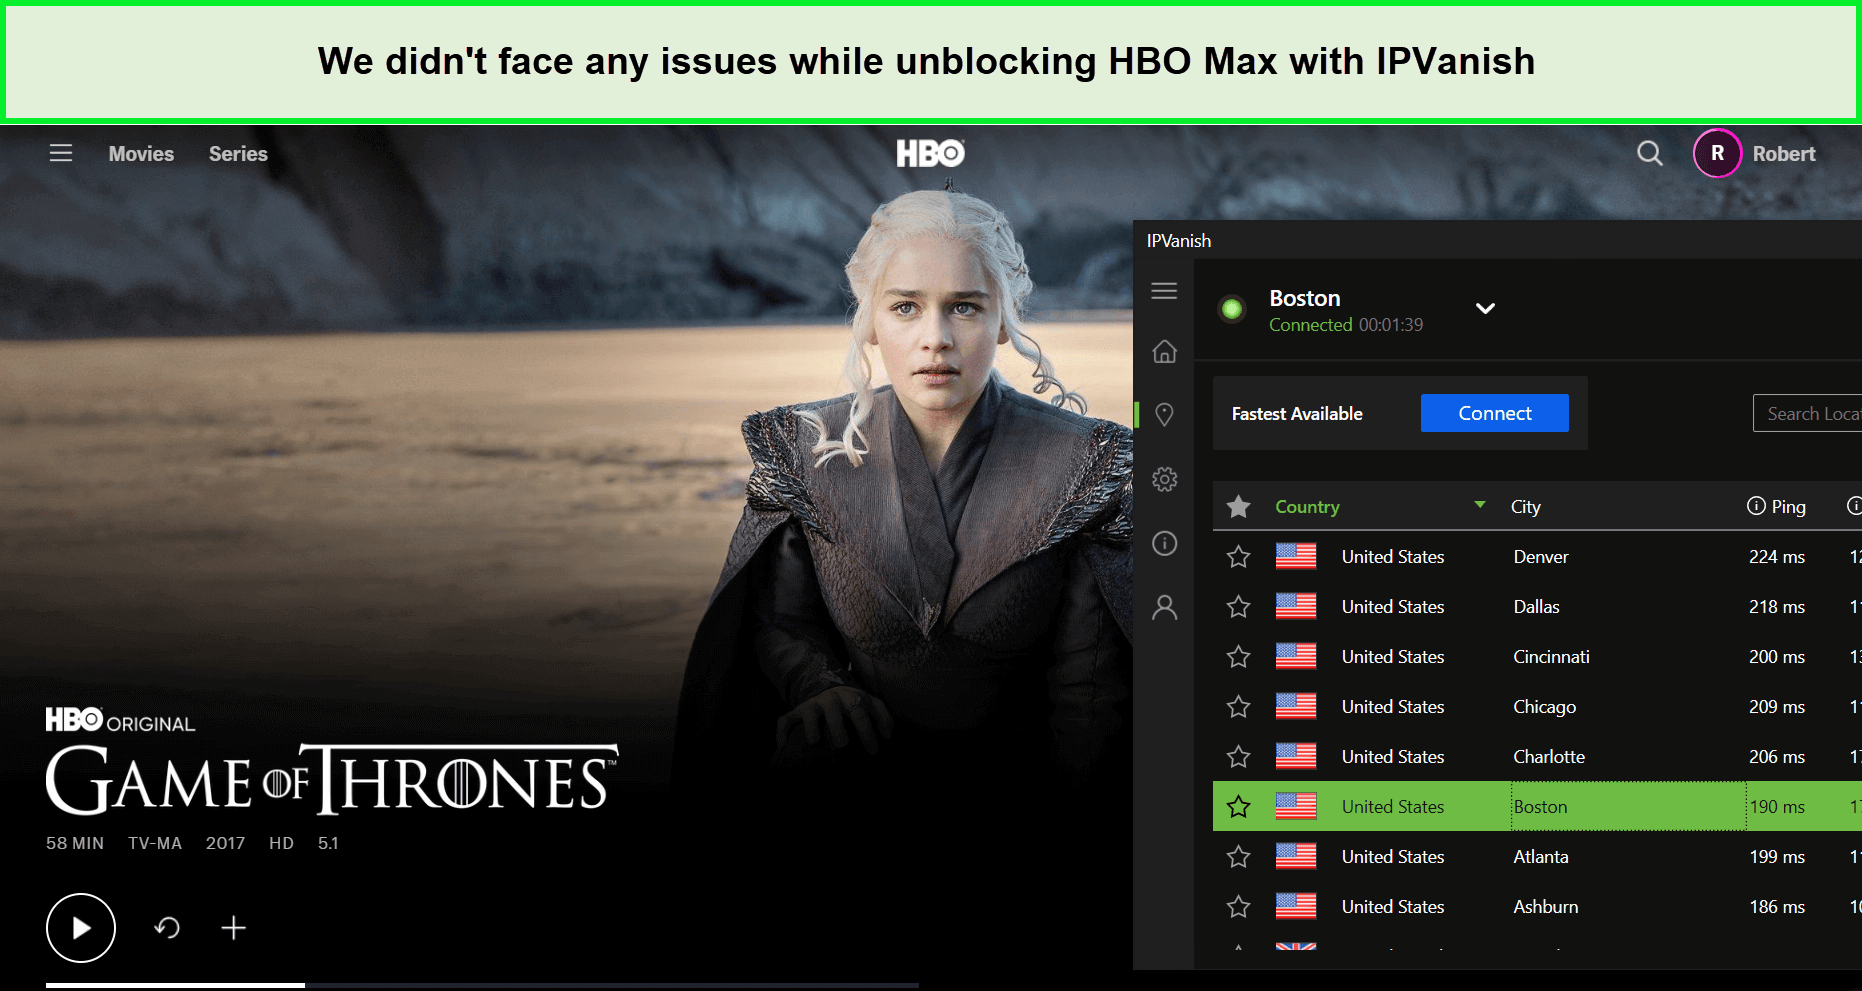 ipvanish-unblocked-hbo-max-with-us-server-For UAE Users